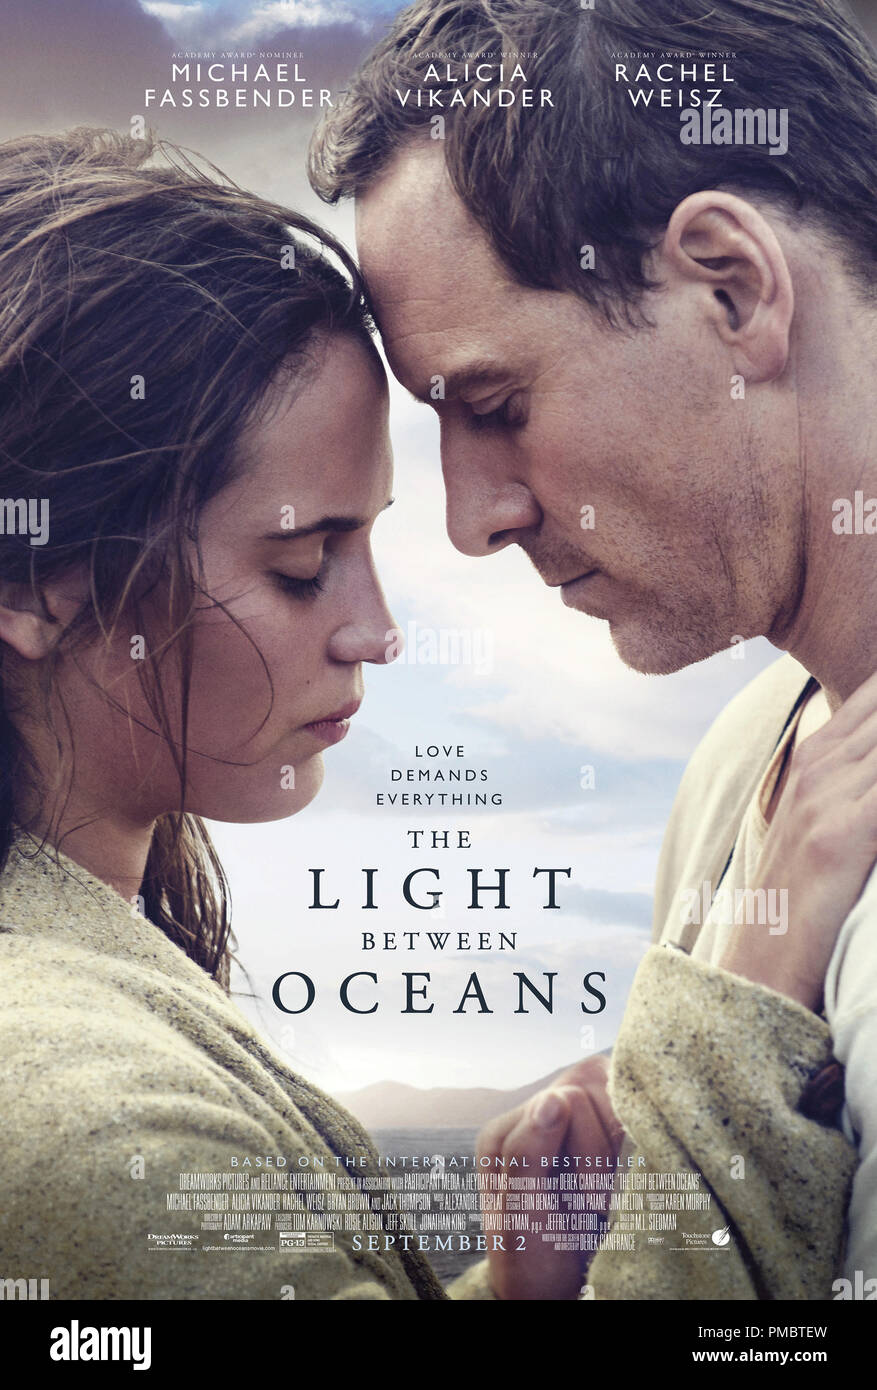 Michael Fassbender stars as Tom Sherbourne and Alicia Vikander as his wife  Isabel in DreamWorks Pictures' poignant drama THE LIGHT BETWEEN OCEANS,  written and directed by Derek Cianfrance based on the acclaimed